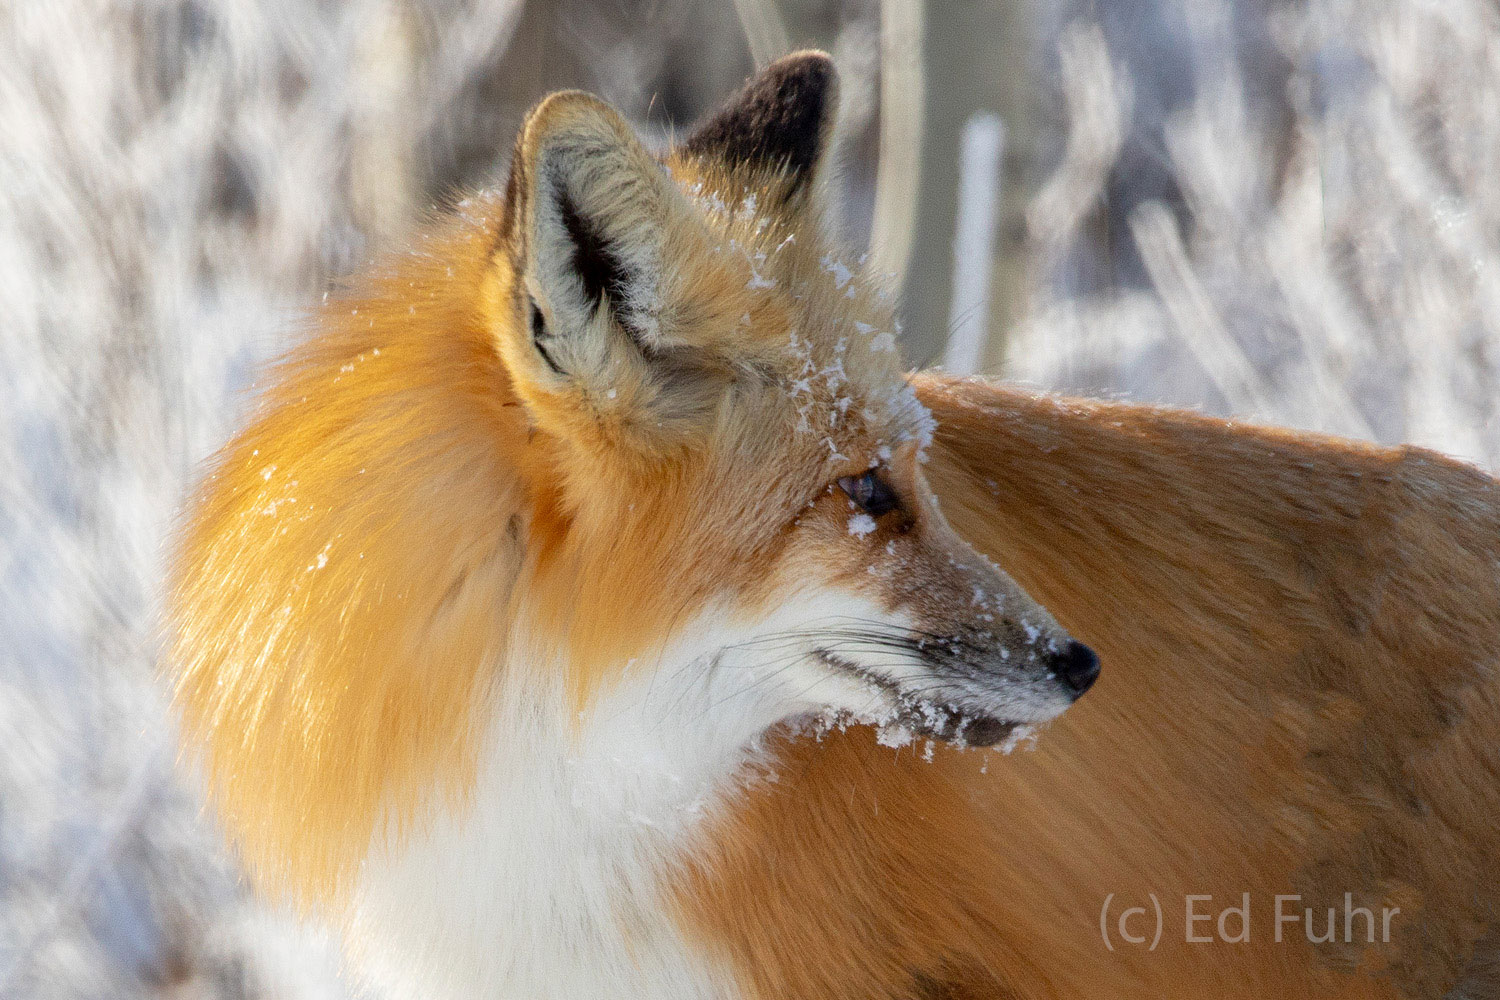 A vixen stops on her trudge through the snow to take a look behind her.